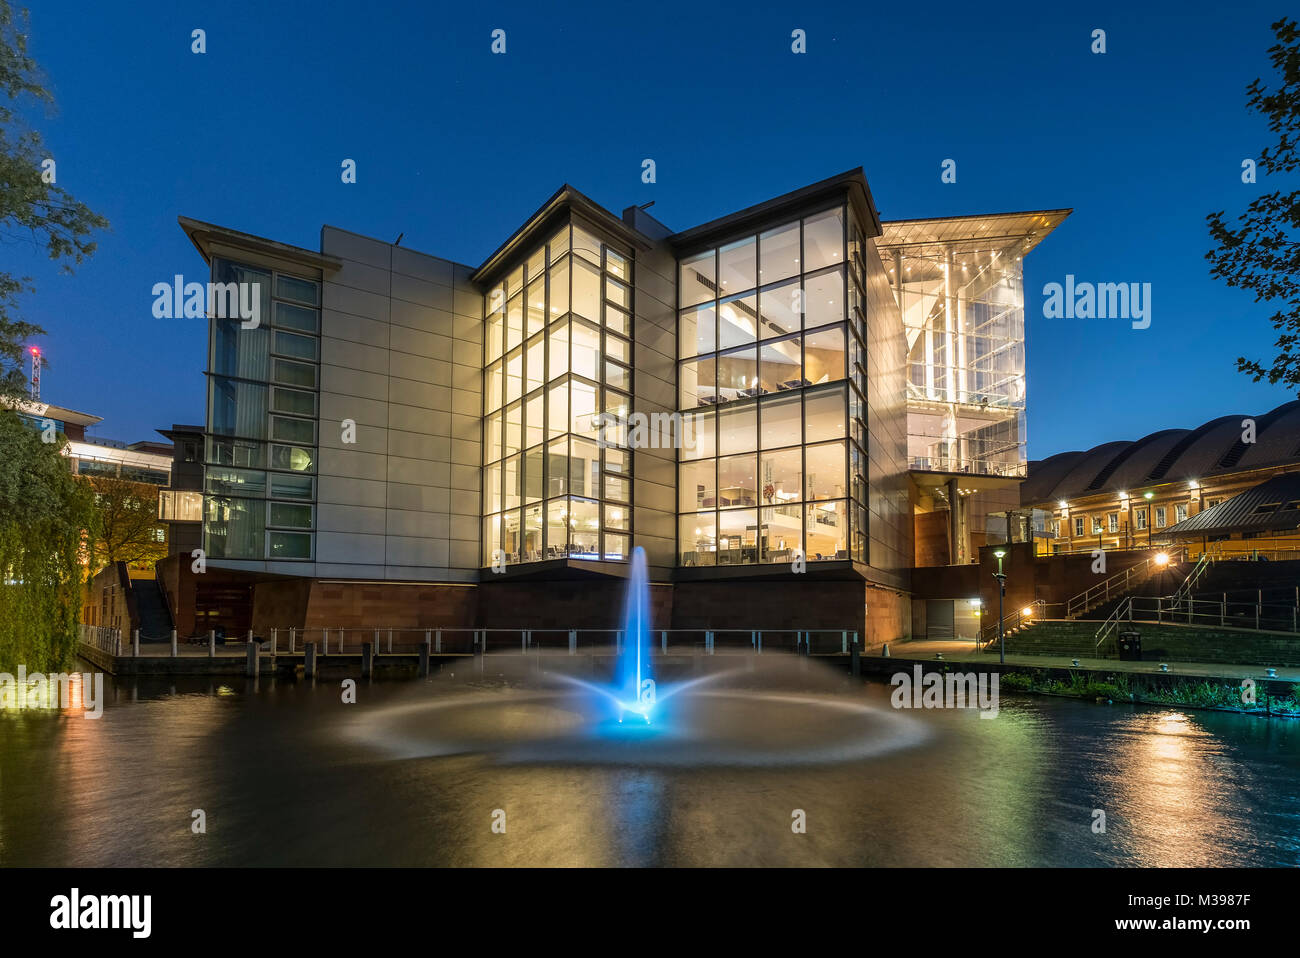 Le Bridgewater Hall de nuit, Manchester, Greater Manchester, Angleterre, RU Banque D'Images